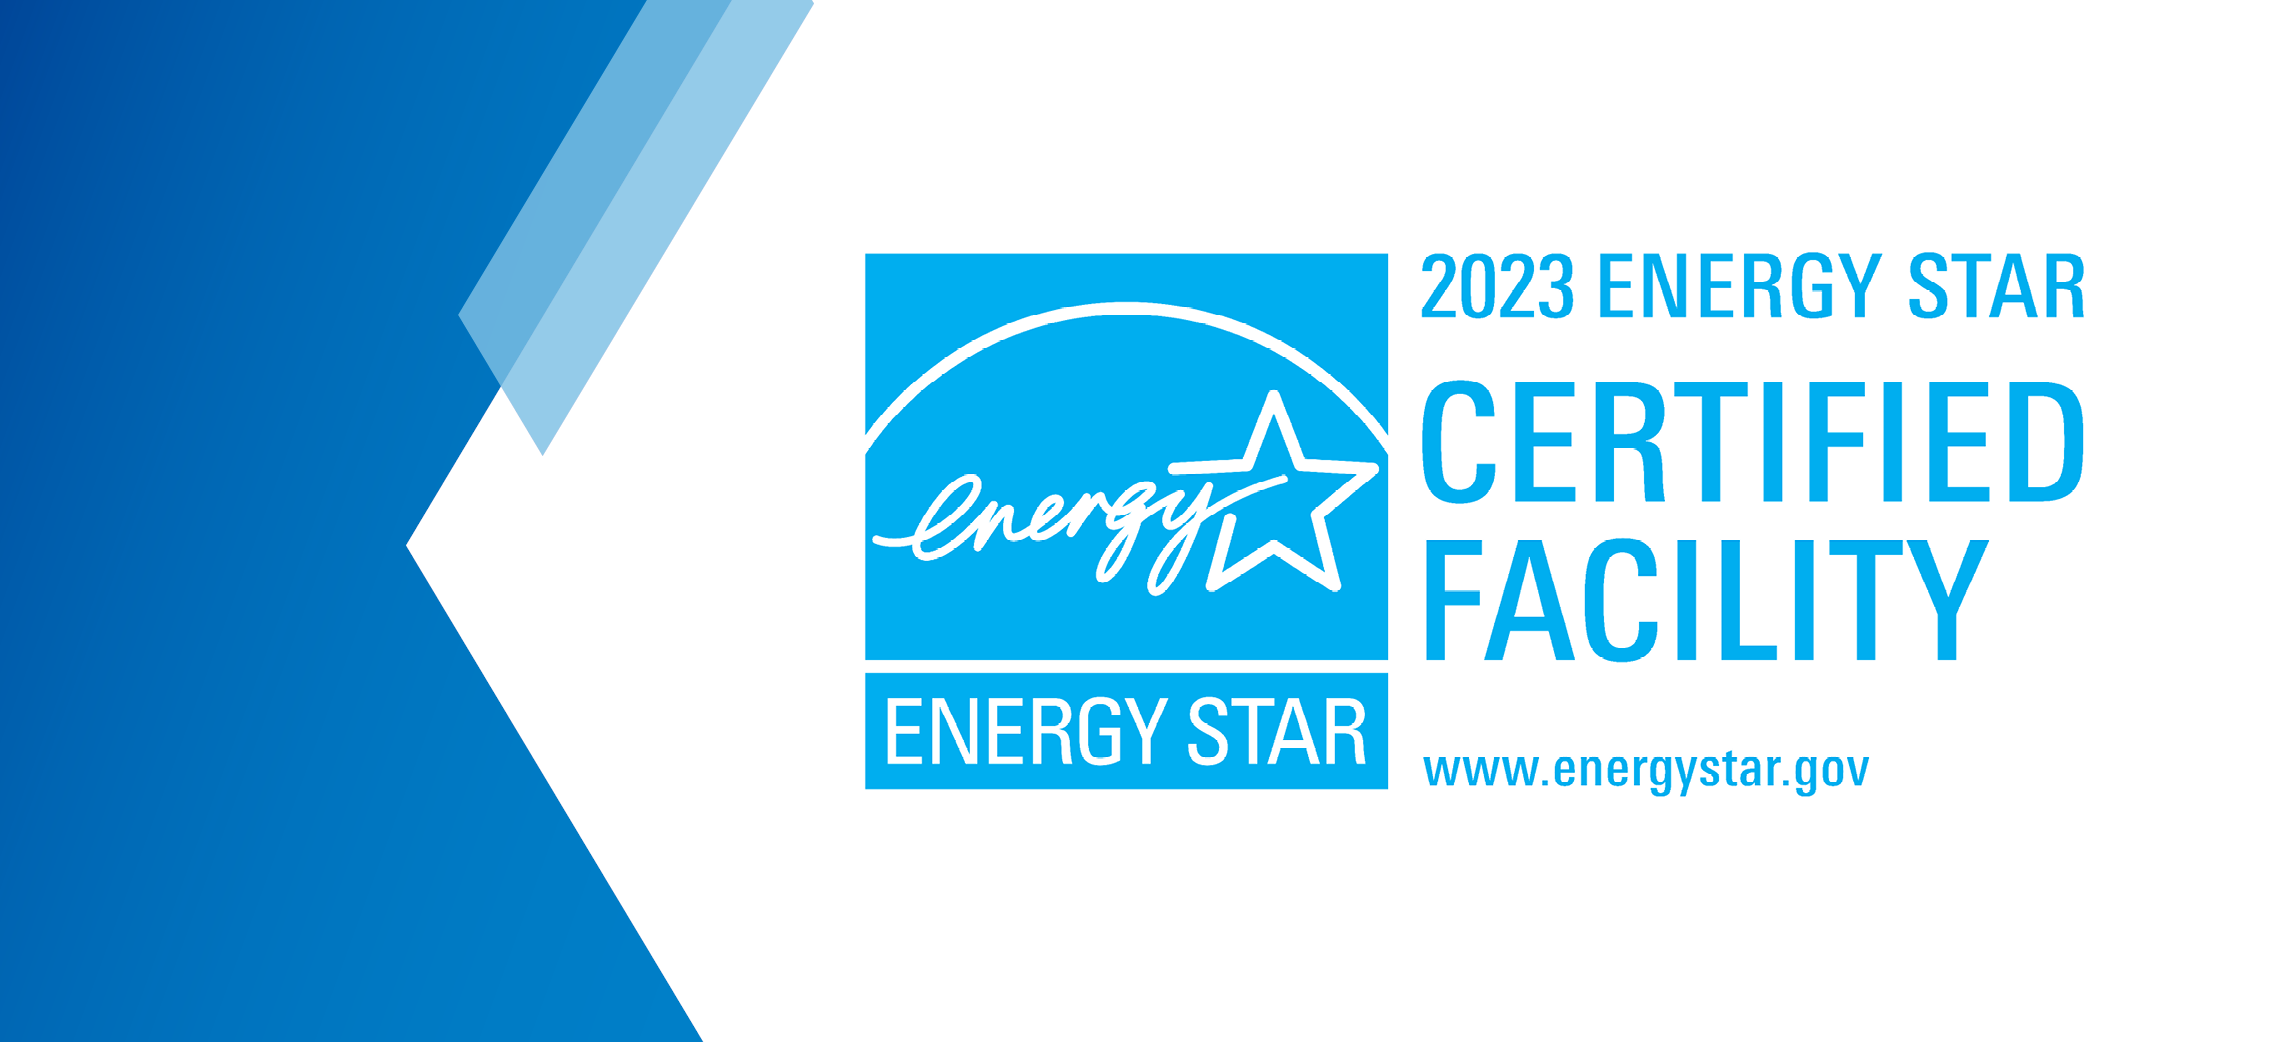 2023 energy star certified facility flag